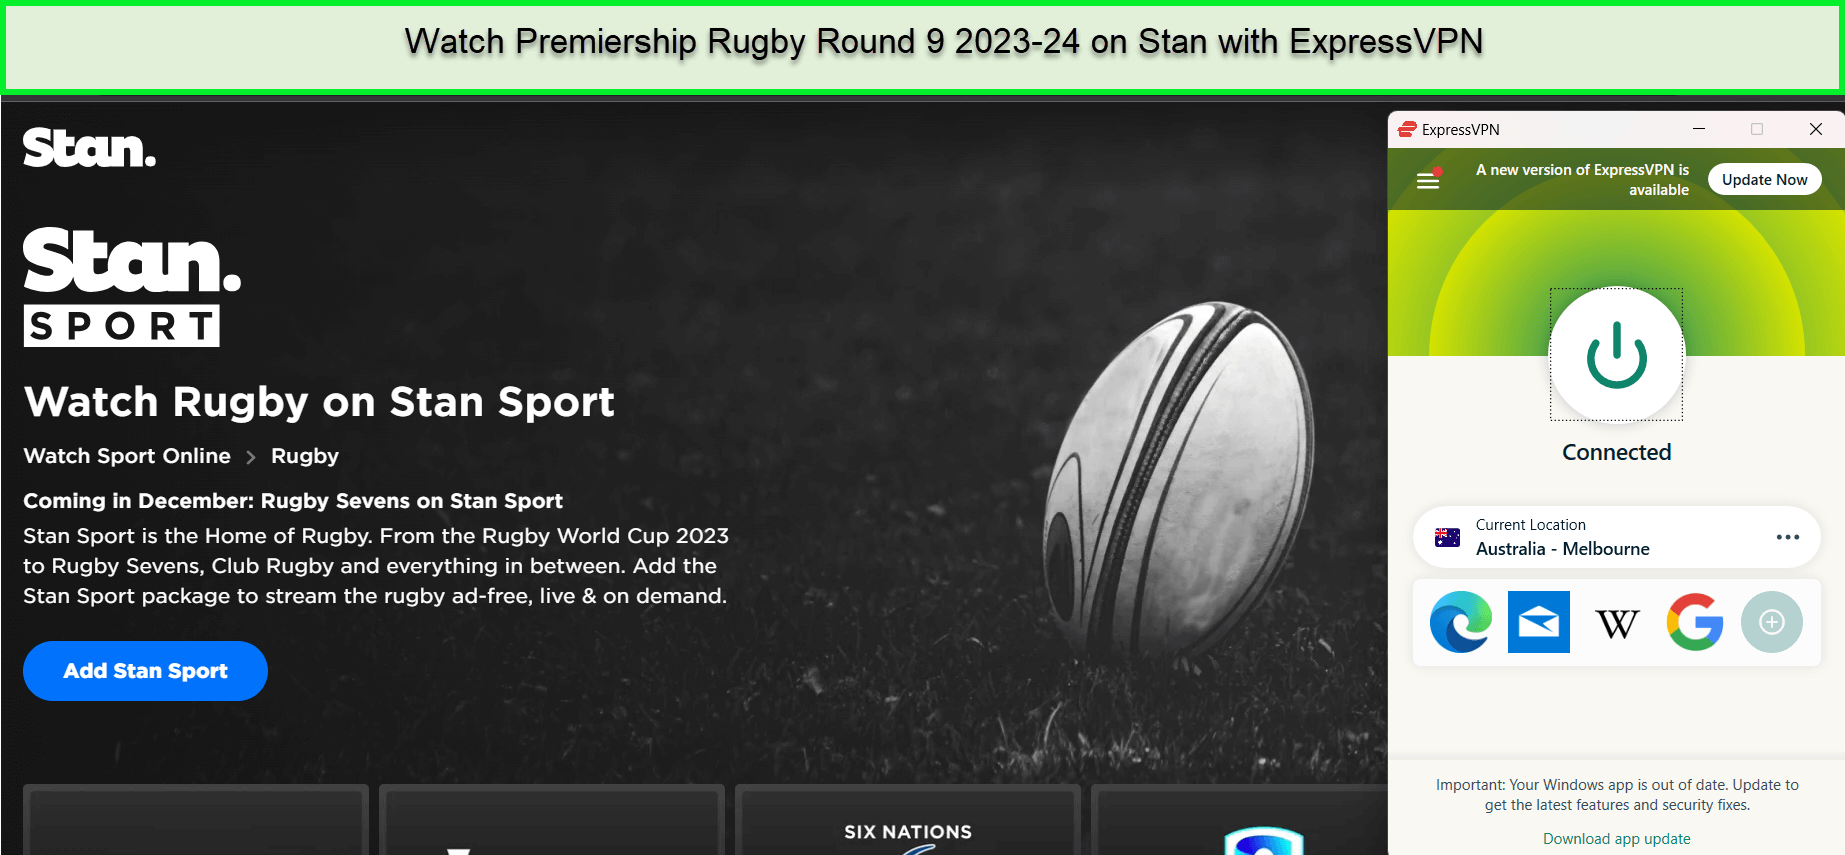 Watch-Premiership-Rugby-Round-9-2023-24-in-India-on-Stan